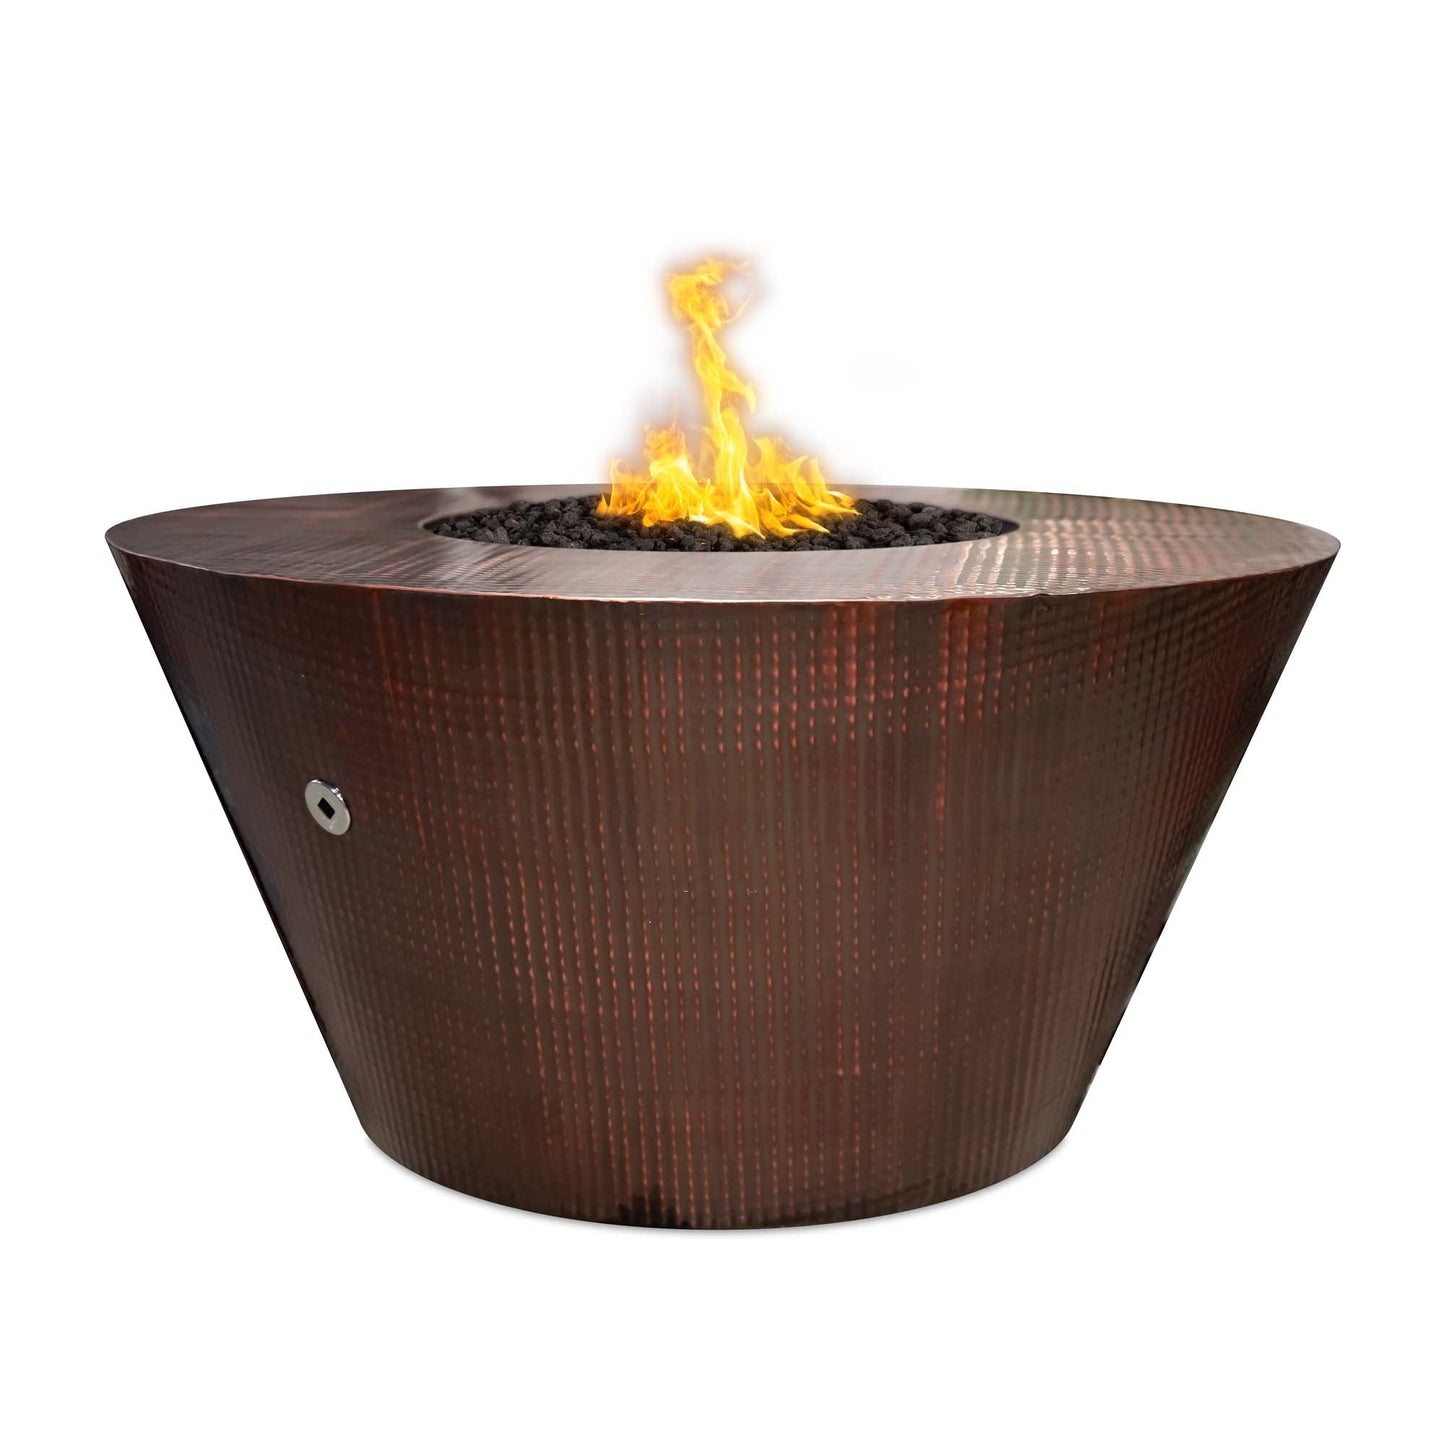 The Outdoor Plus Round Martillo 48" Copper Vein Powder Coated Metal Liquid Propane Fire Pit with 12V Electronic Ignition